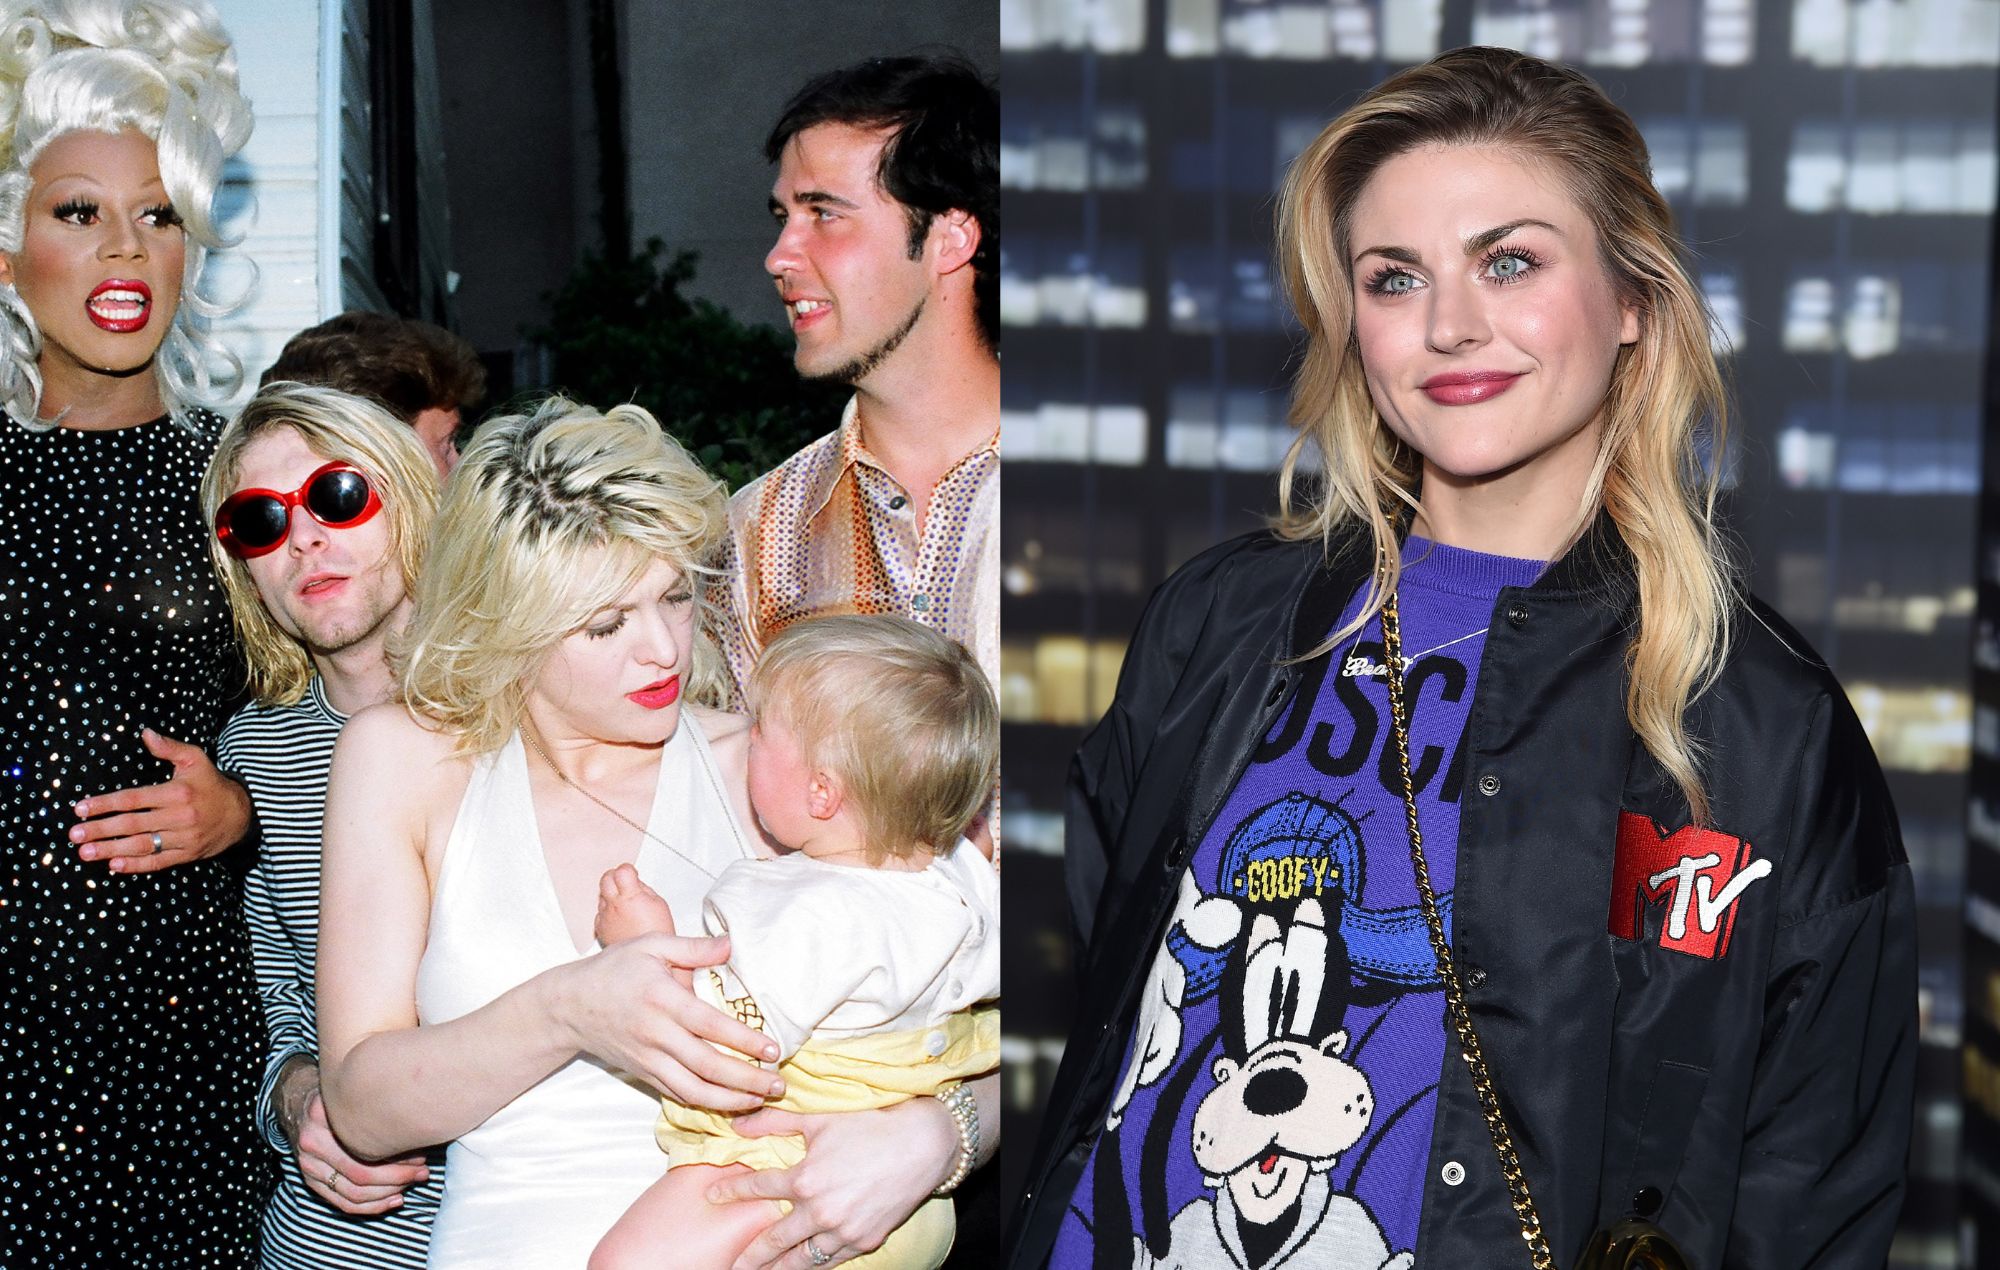 Frances Bean speaks out on loss of Kurt Cobain on 30th anniversary of death: “I wish I could have known my dad”